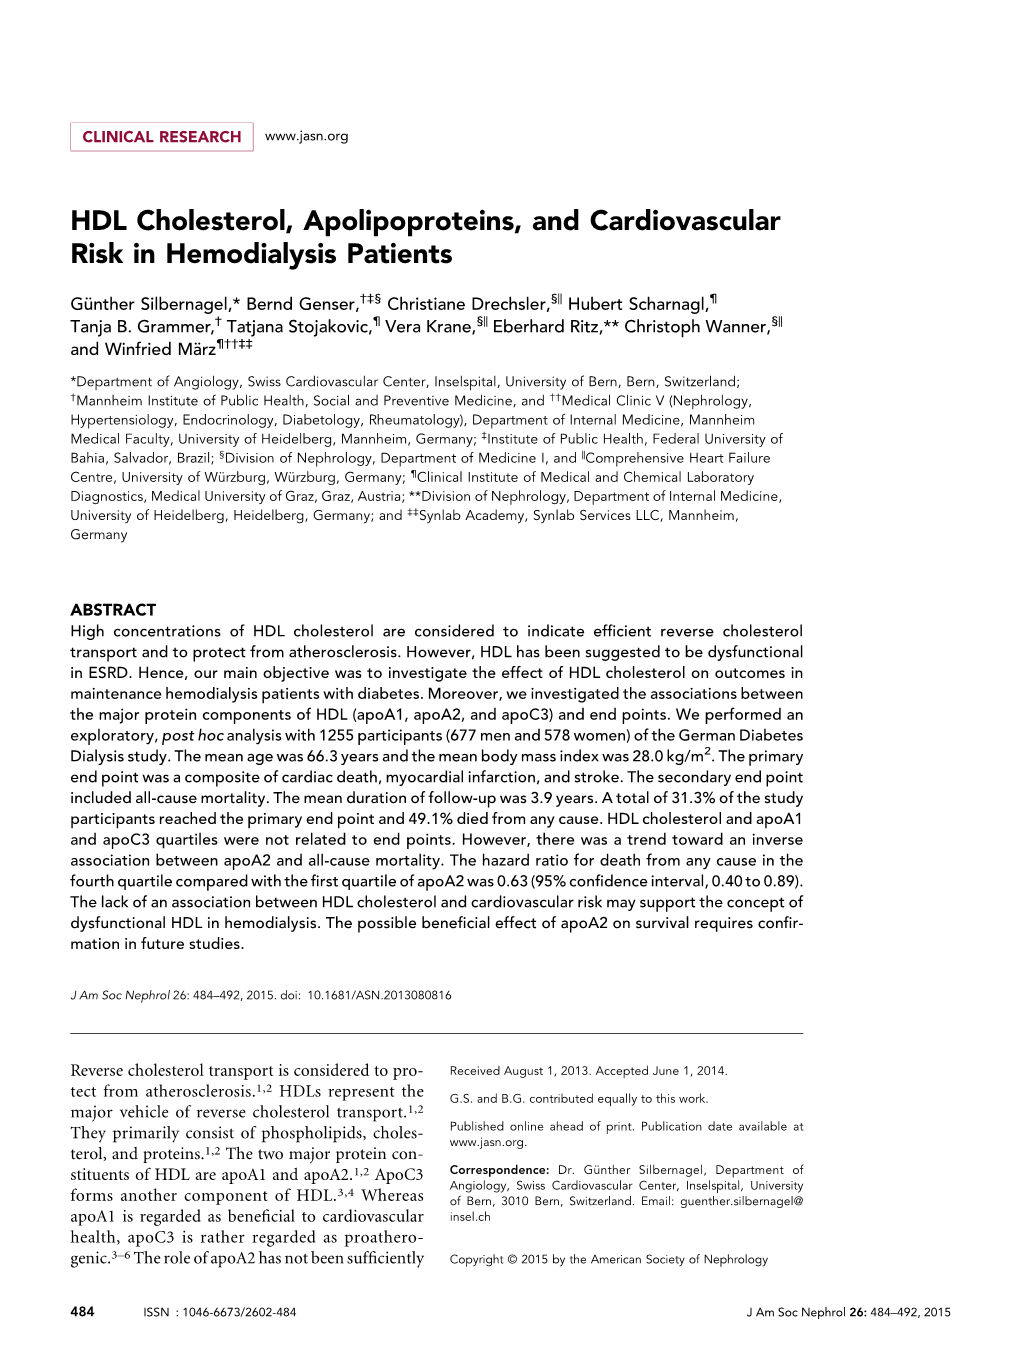 HDL Cholesterol, Apolipoproteins, and Cardiovascular Risk in Hemodialysis Patients